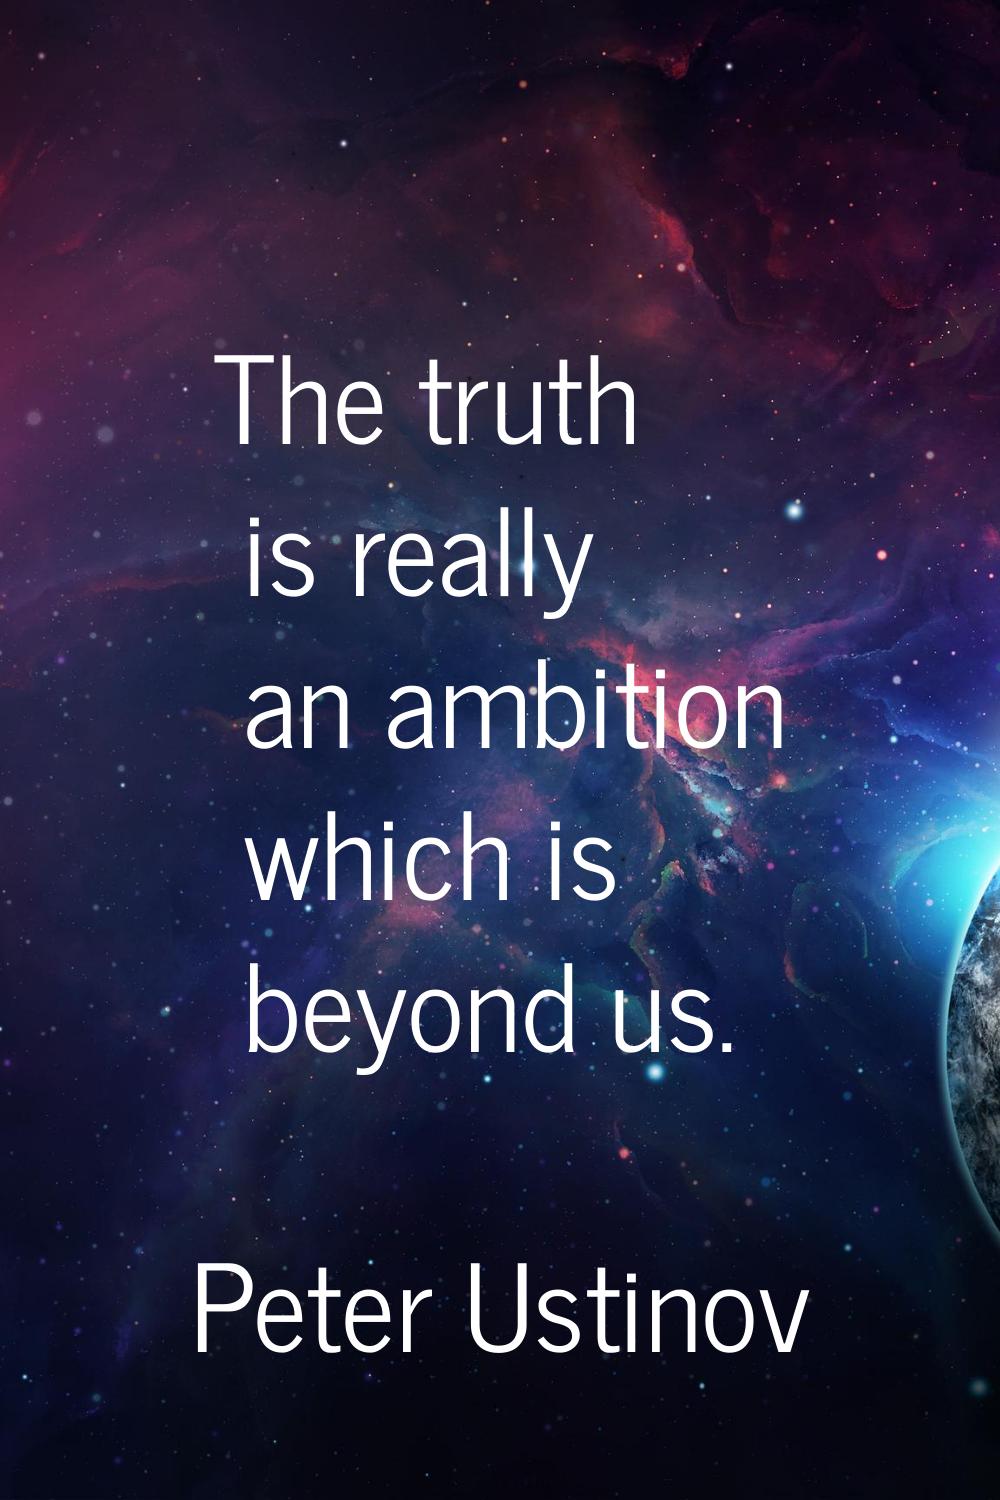 The truth is really an ambition which is beyond us.